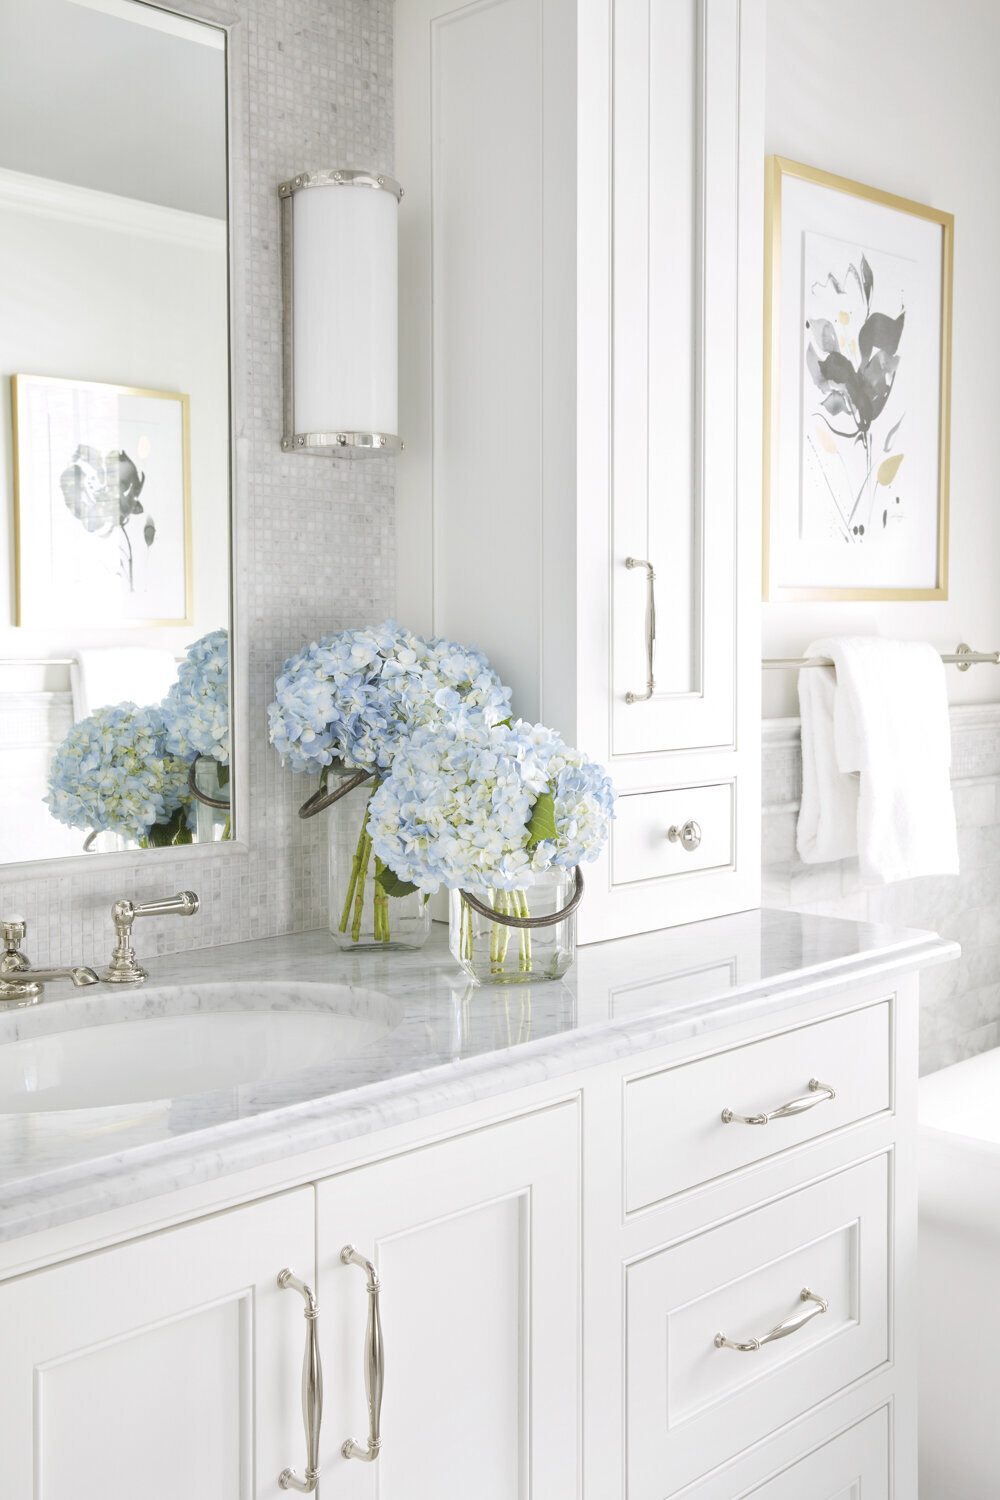 Panageries Residential Interior Design | Vibrant Classic Bungalow Master Bath With Fresh Blue Hydrangeas